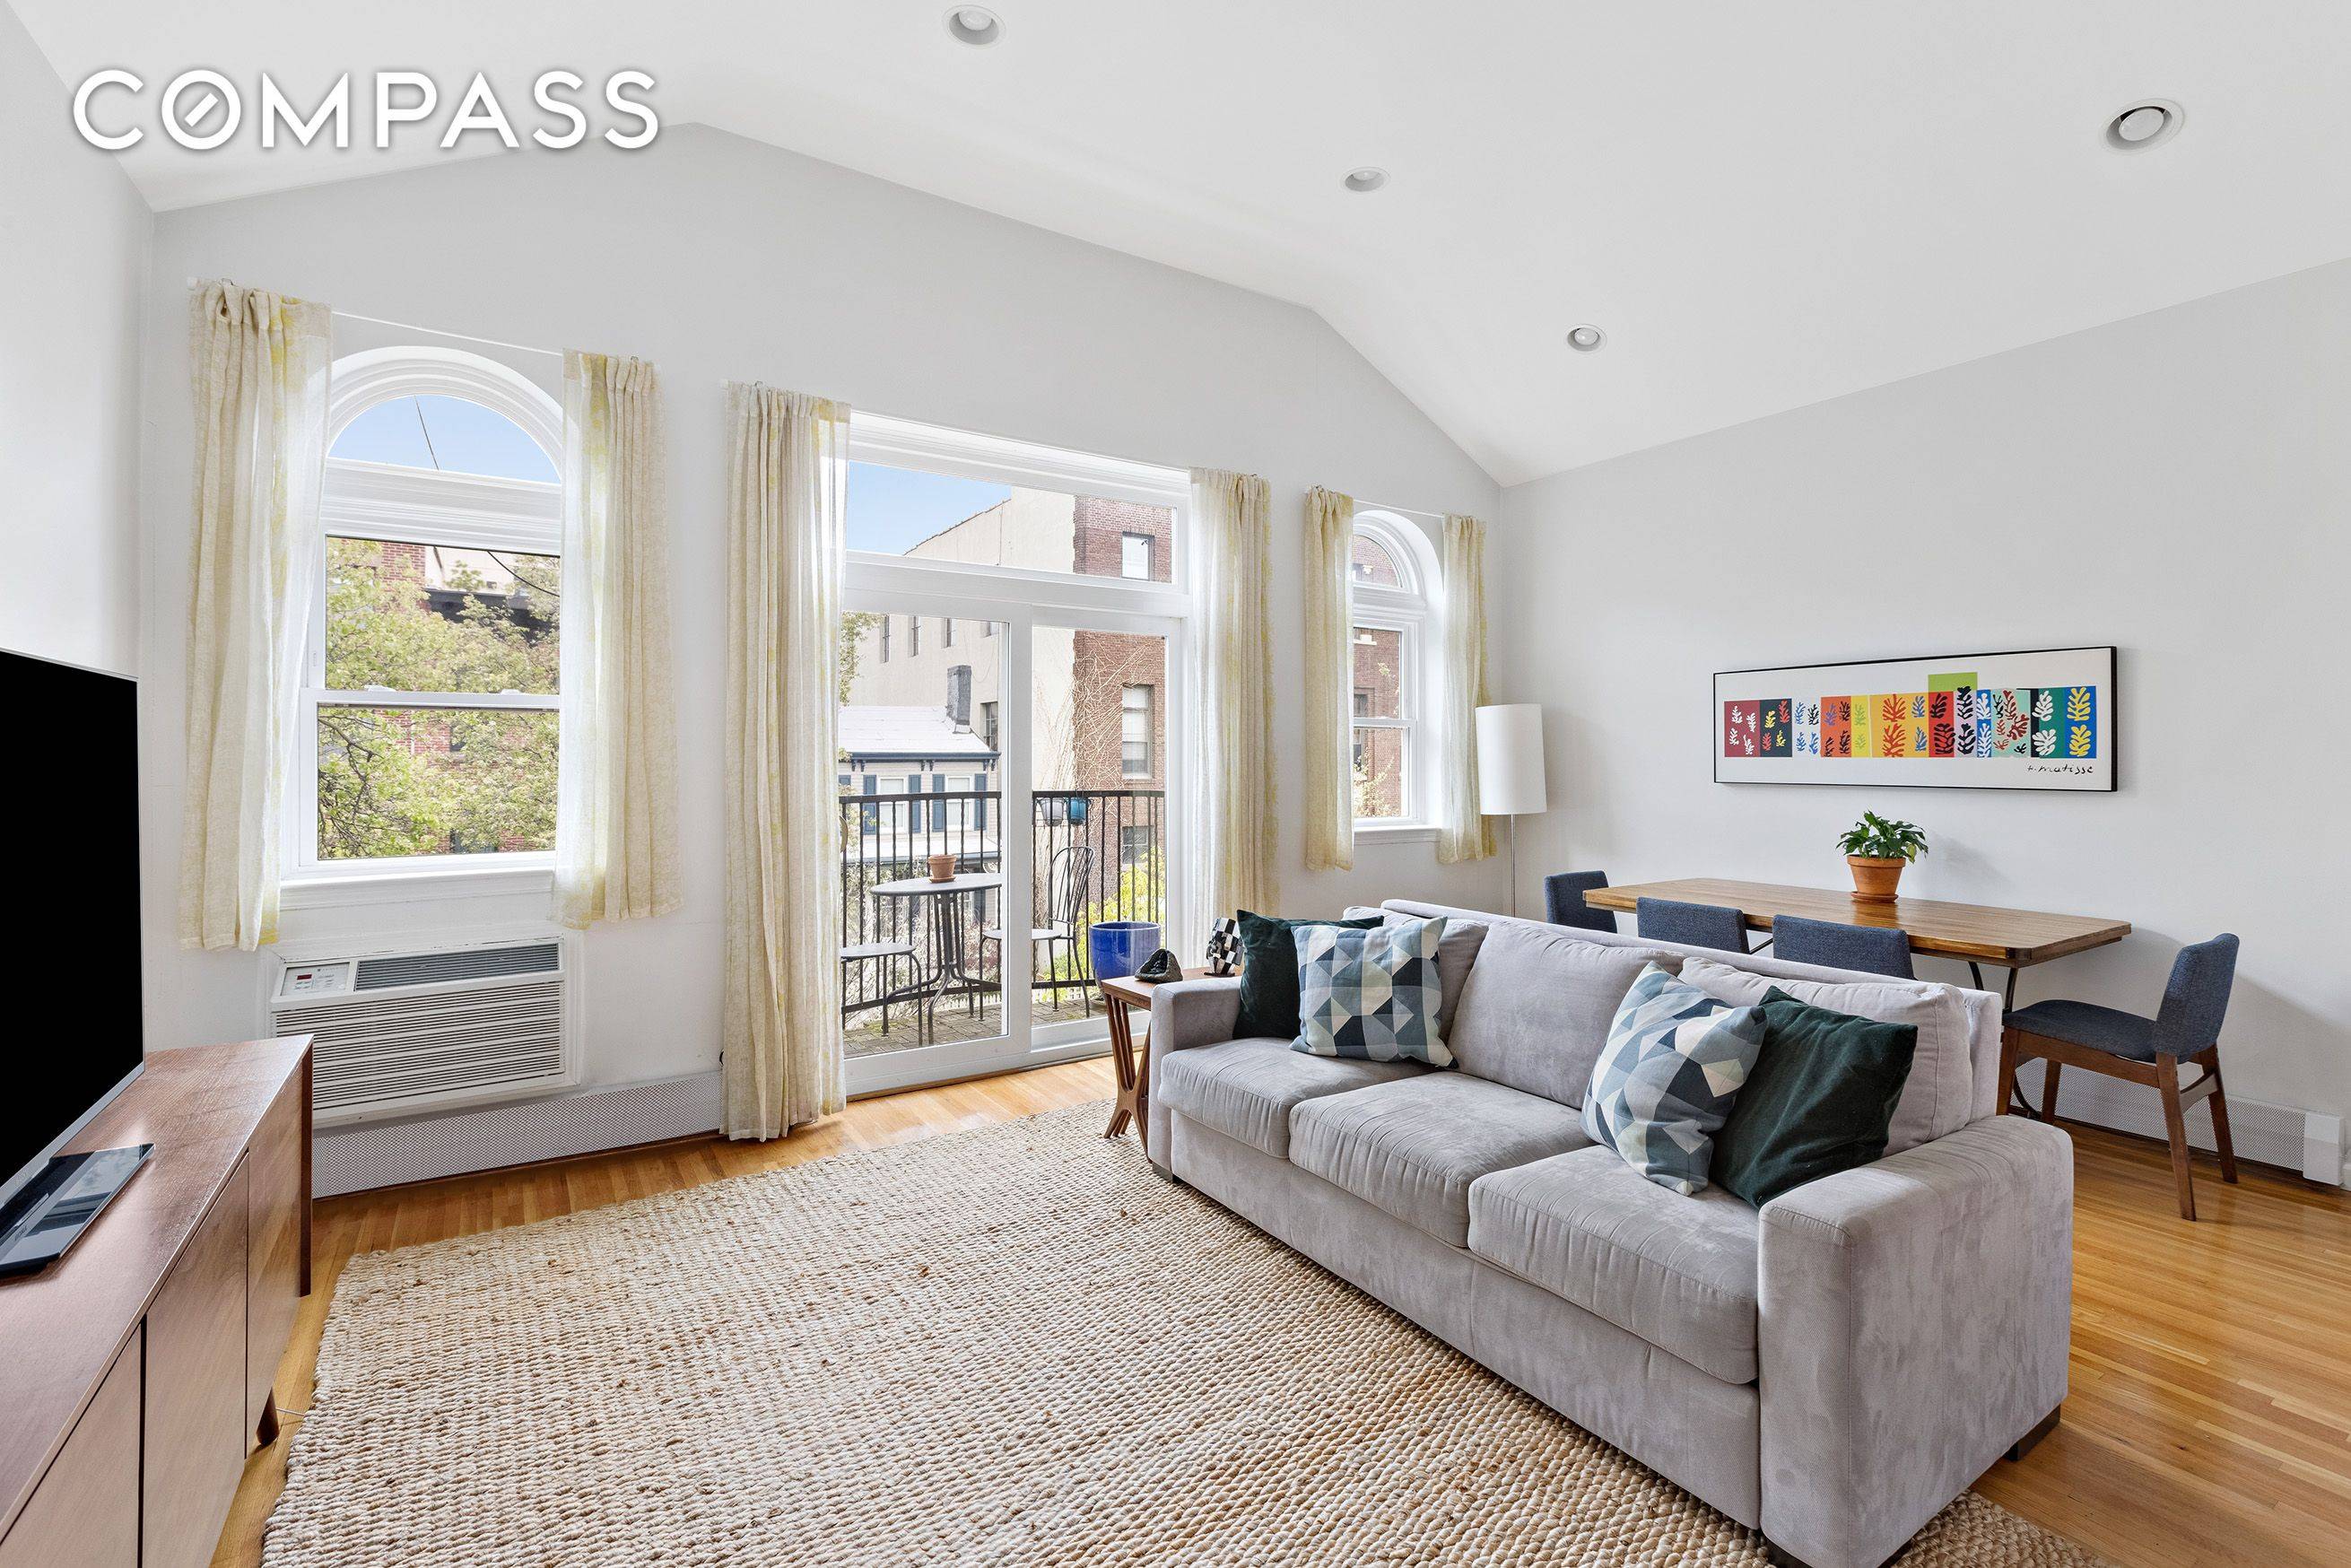 Prepare to be blown away by this fully renovated 2 3 BR 2ba top floor condo on one of the loveliest blocks in Park Slope.